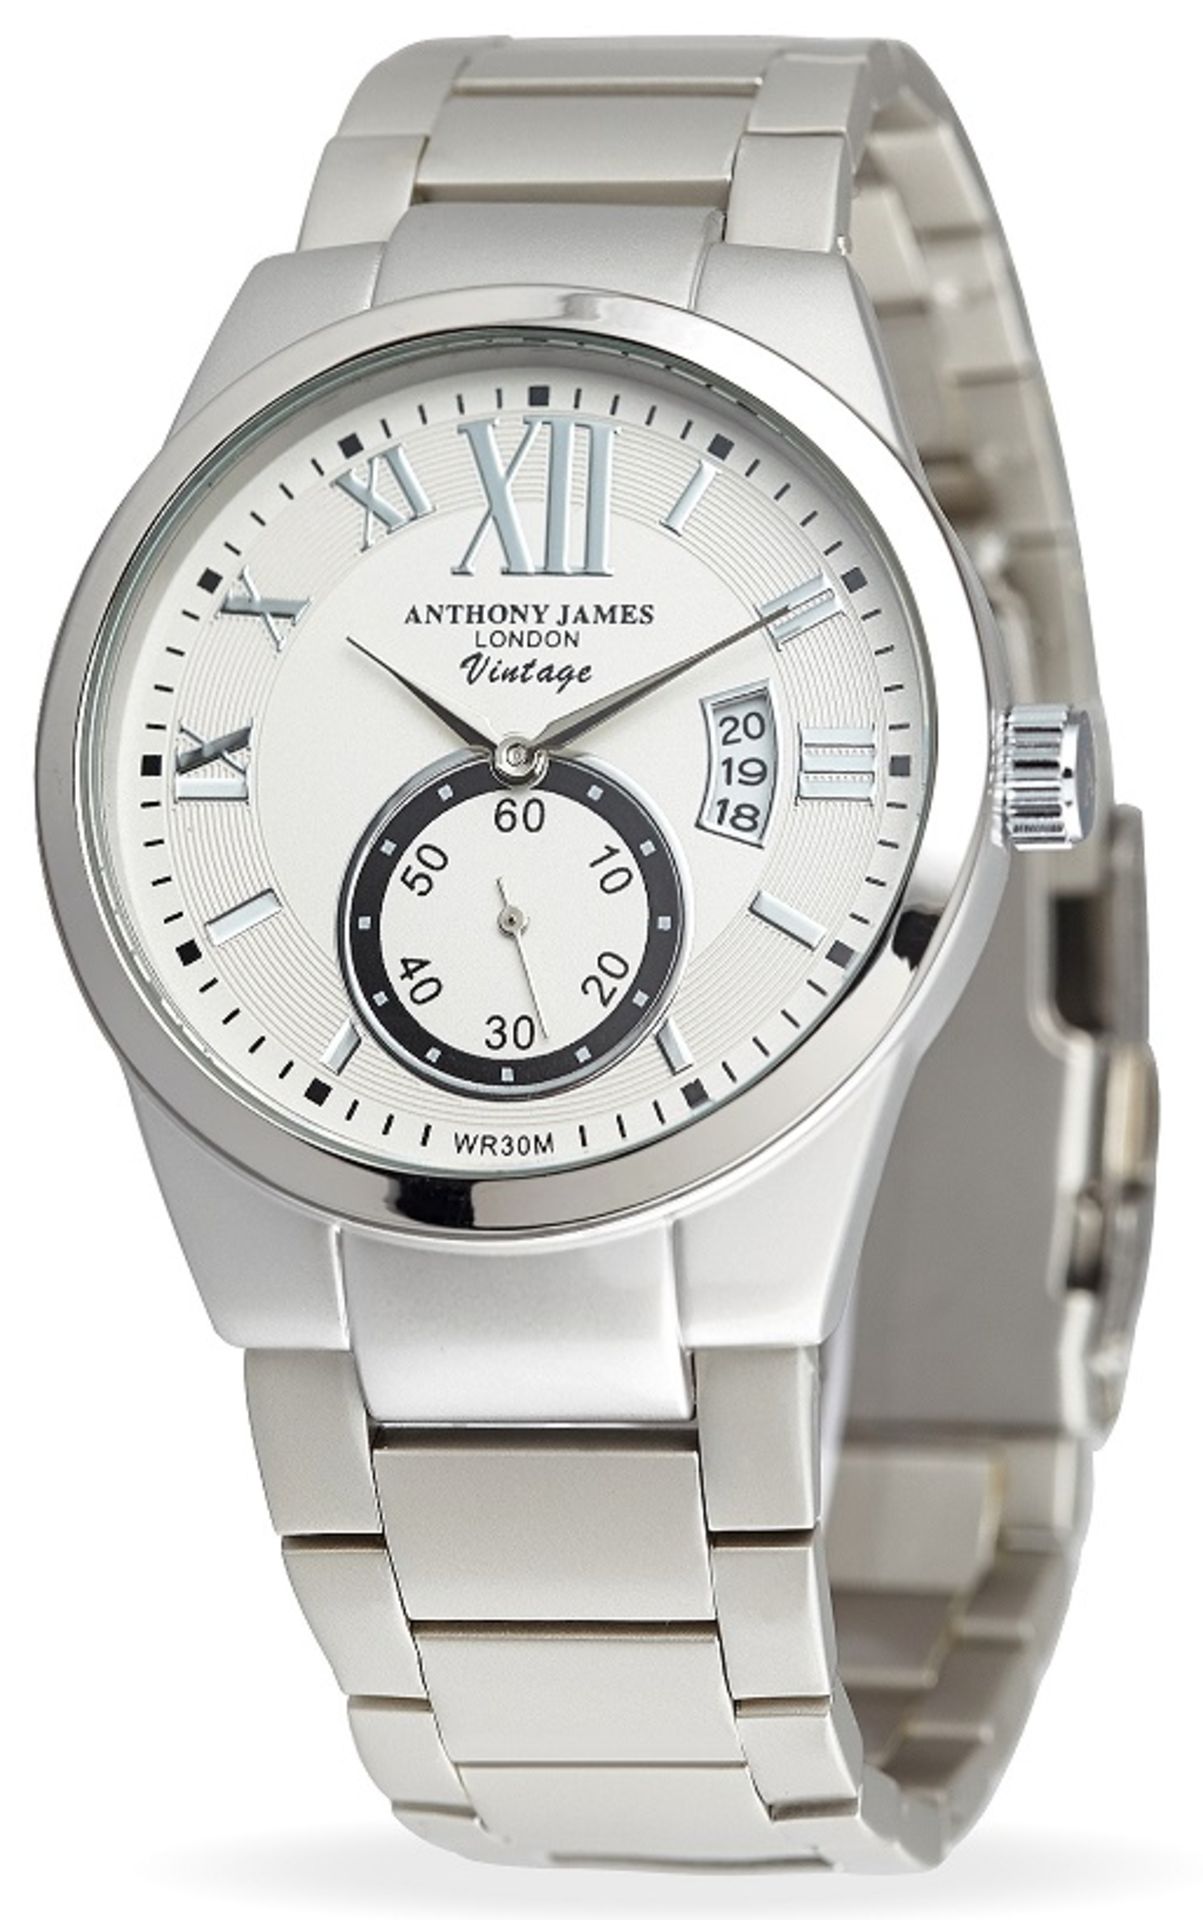 V Brand New Gents Anthony James "Vintage" Stainless Steel Watch With White Face - Date - Separate